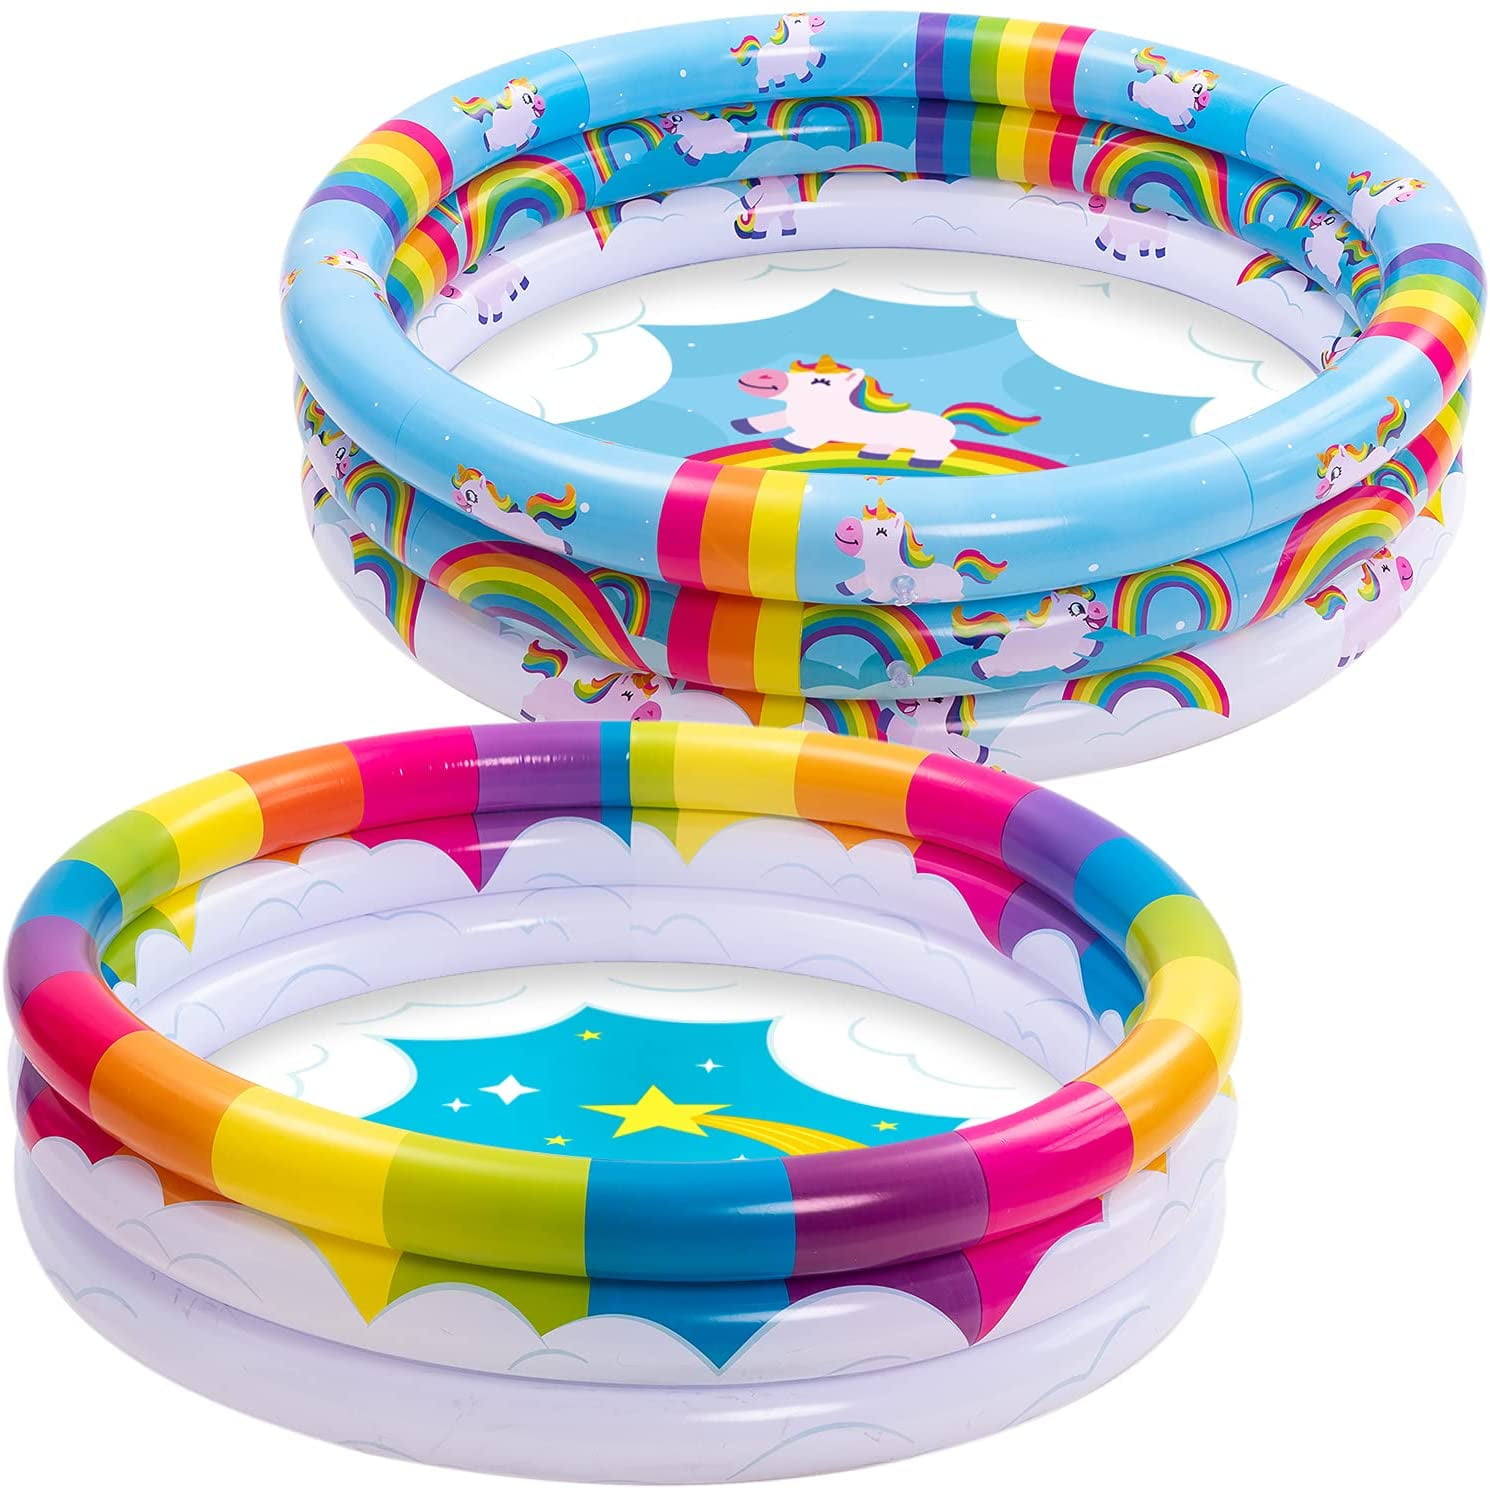 2 Pack 34 Unicorn Cloud & Rainbow Inflatable Kiddie Pool Set Family Swimming Pool Water Pool Pit Ball Pool for Kids Toddler Indoor Outdoor Summer Fun 